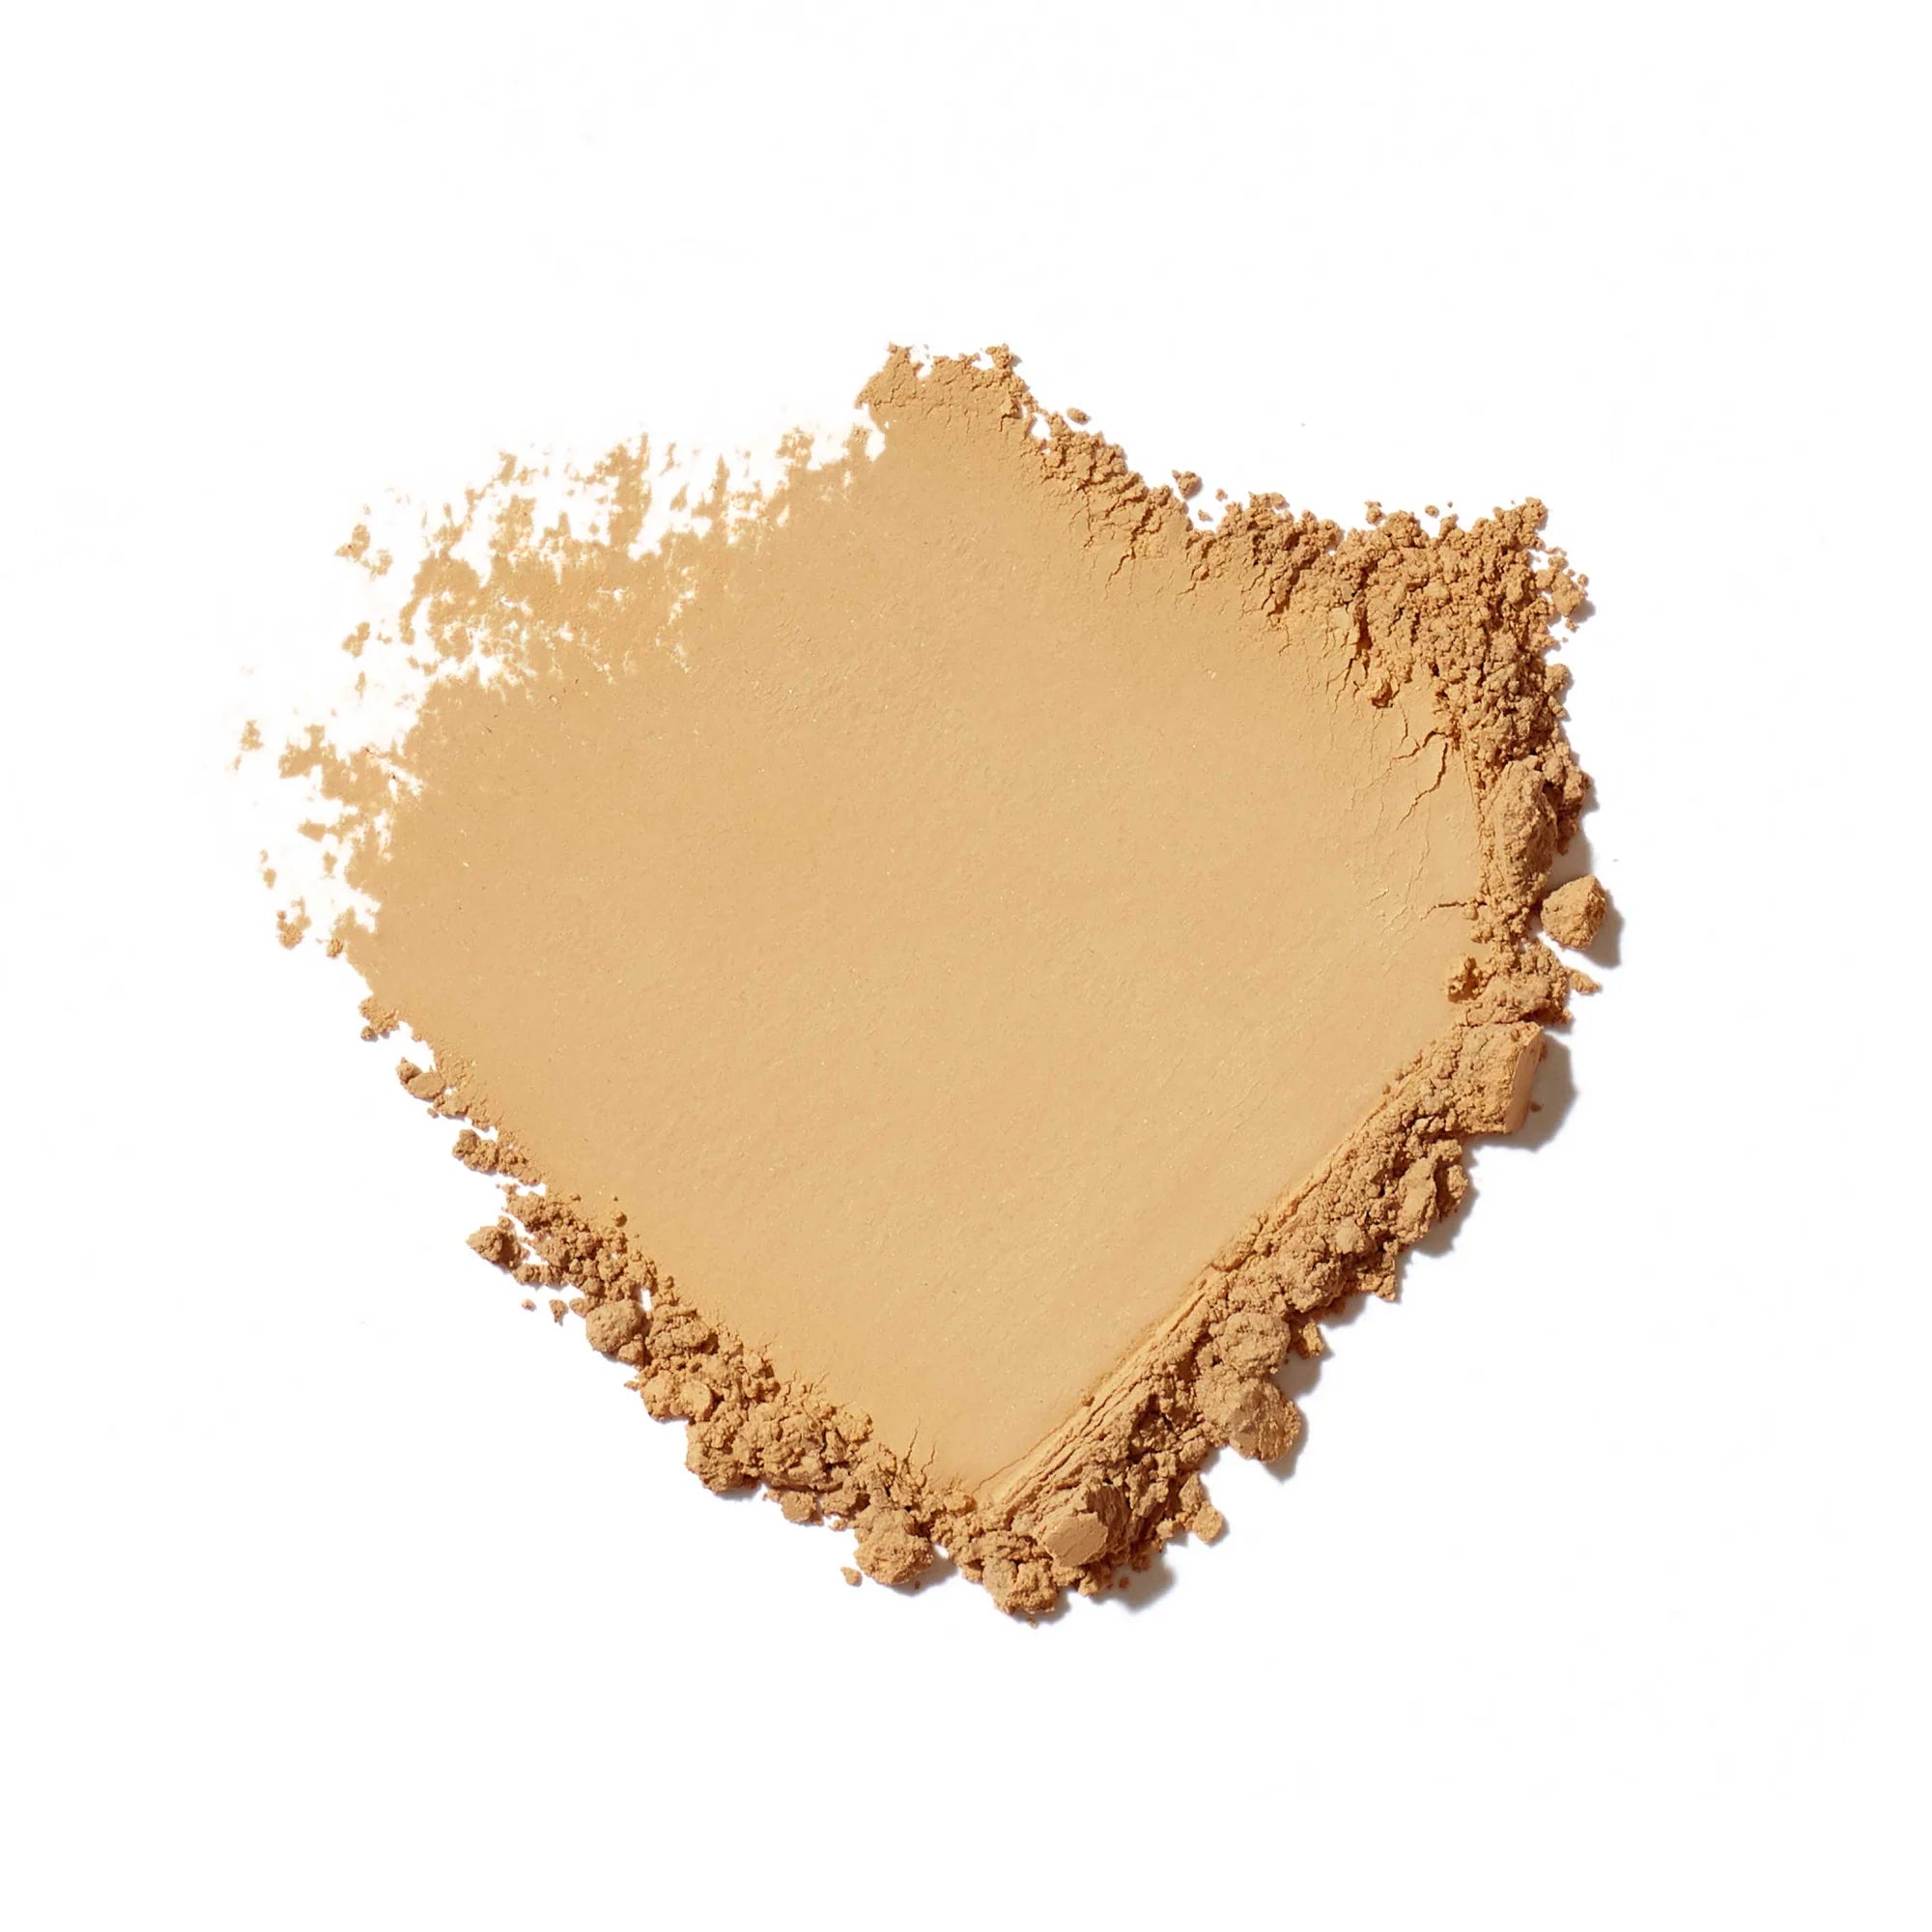 Jane Iredale's Amazing Base® Loose Mineral Powder Refill Brush - shade Golden Glow - Medium with strong gold undertones